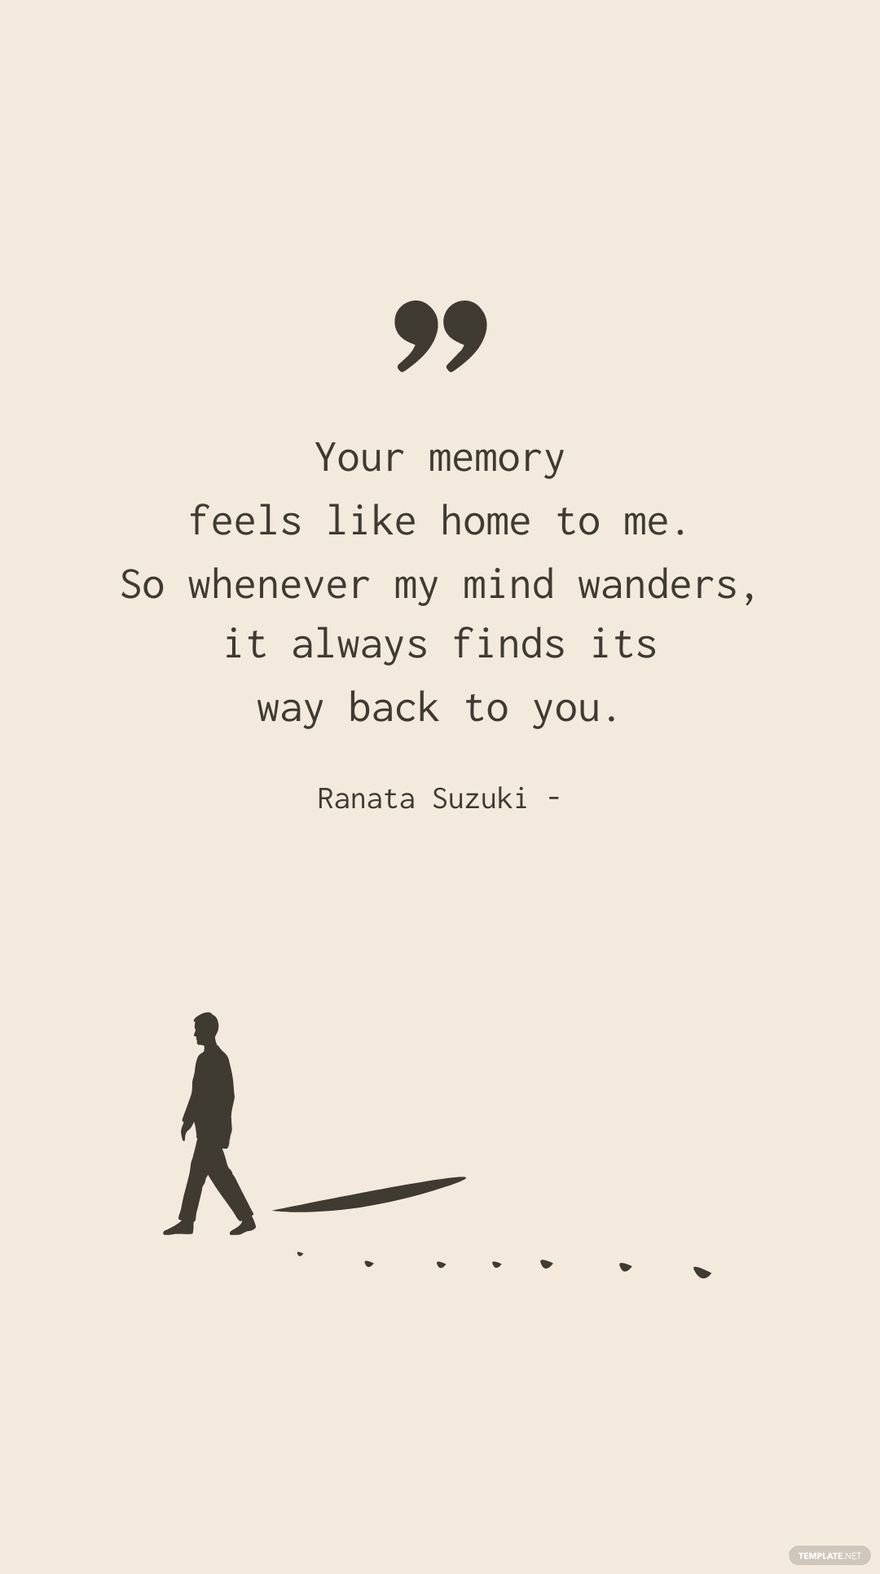 Free Ranata Suzuki - Your memory feels like home to me. So whenever my mind wanders, it always finds its way back to you. in JPG